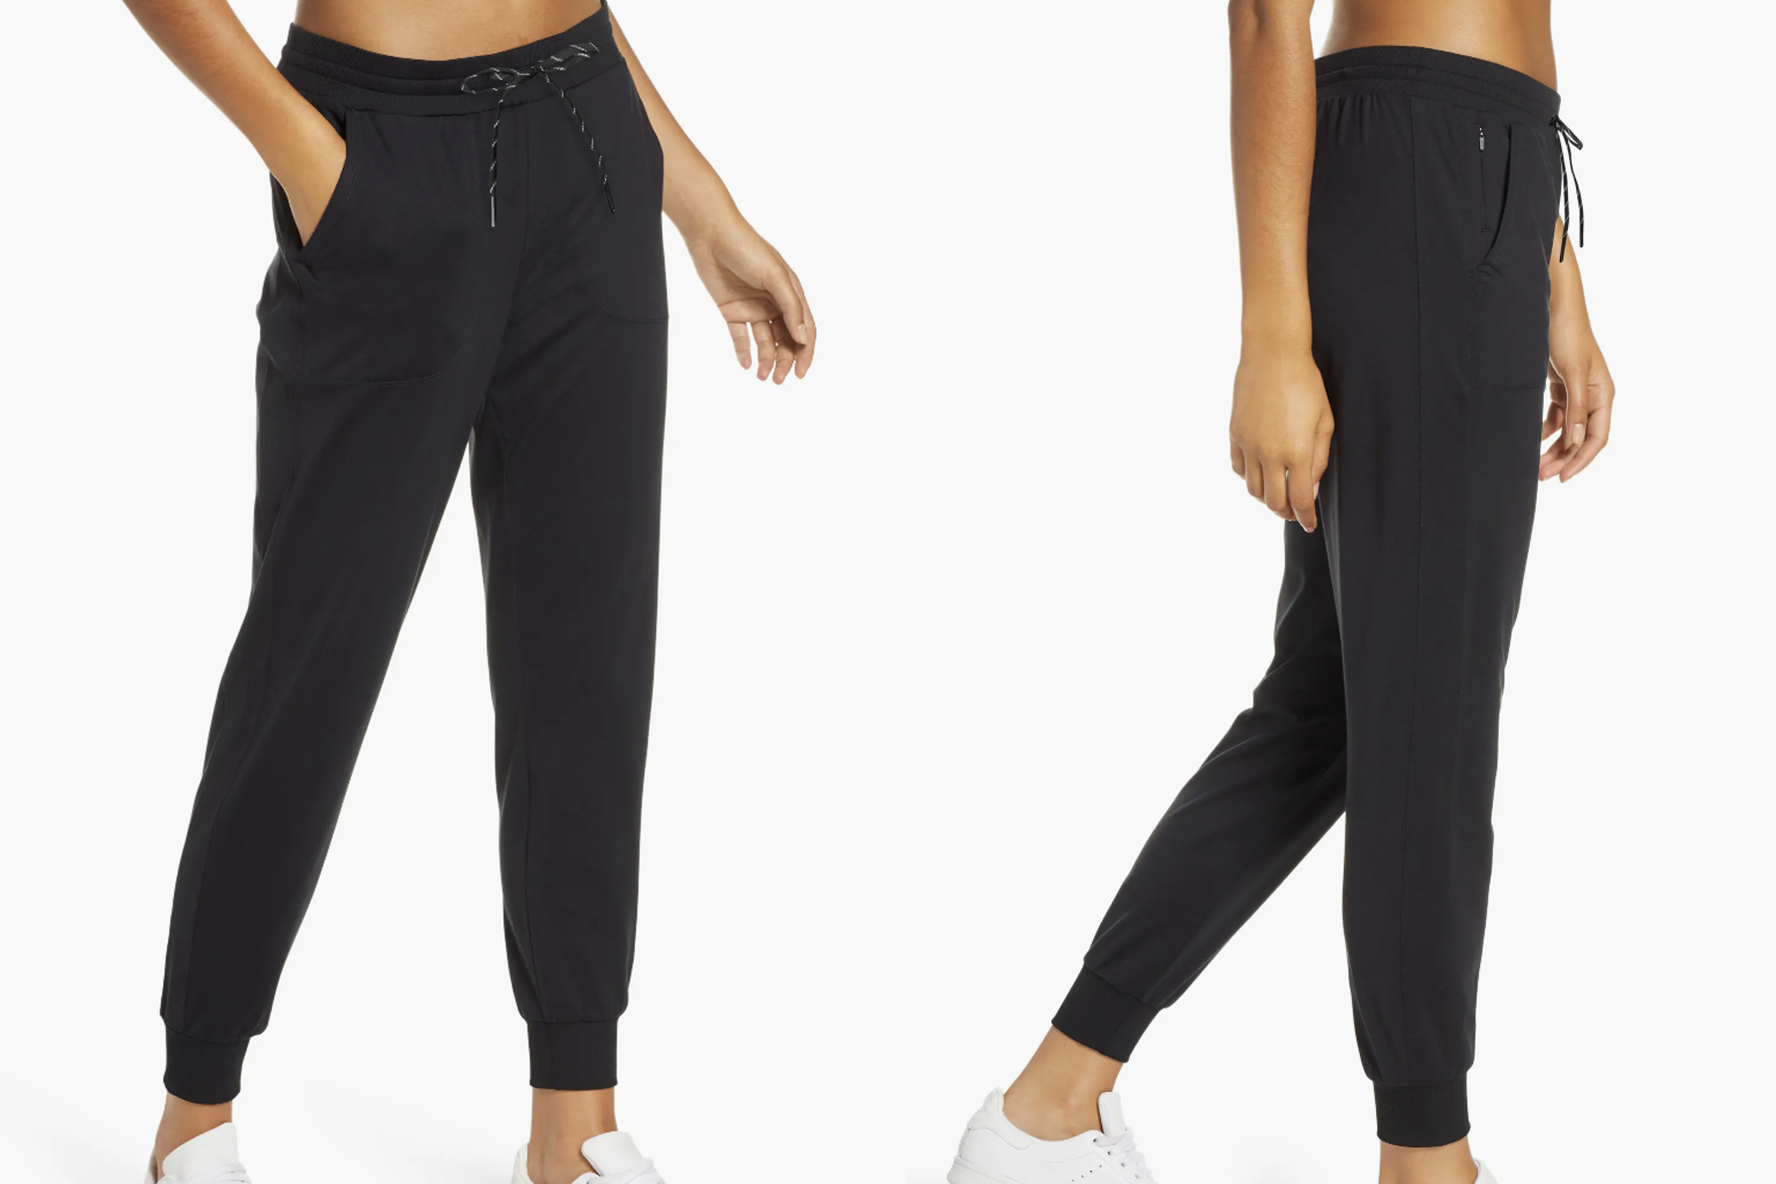 Why I'm Buying the Zella Live In Pocket Joggers From Nordstrom